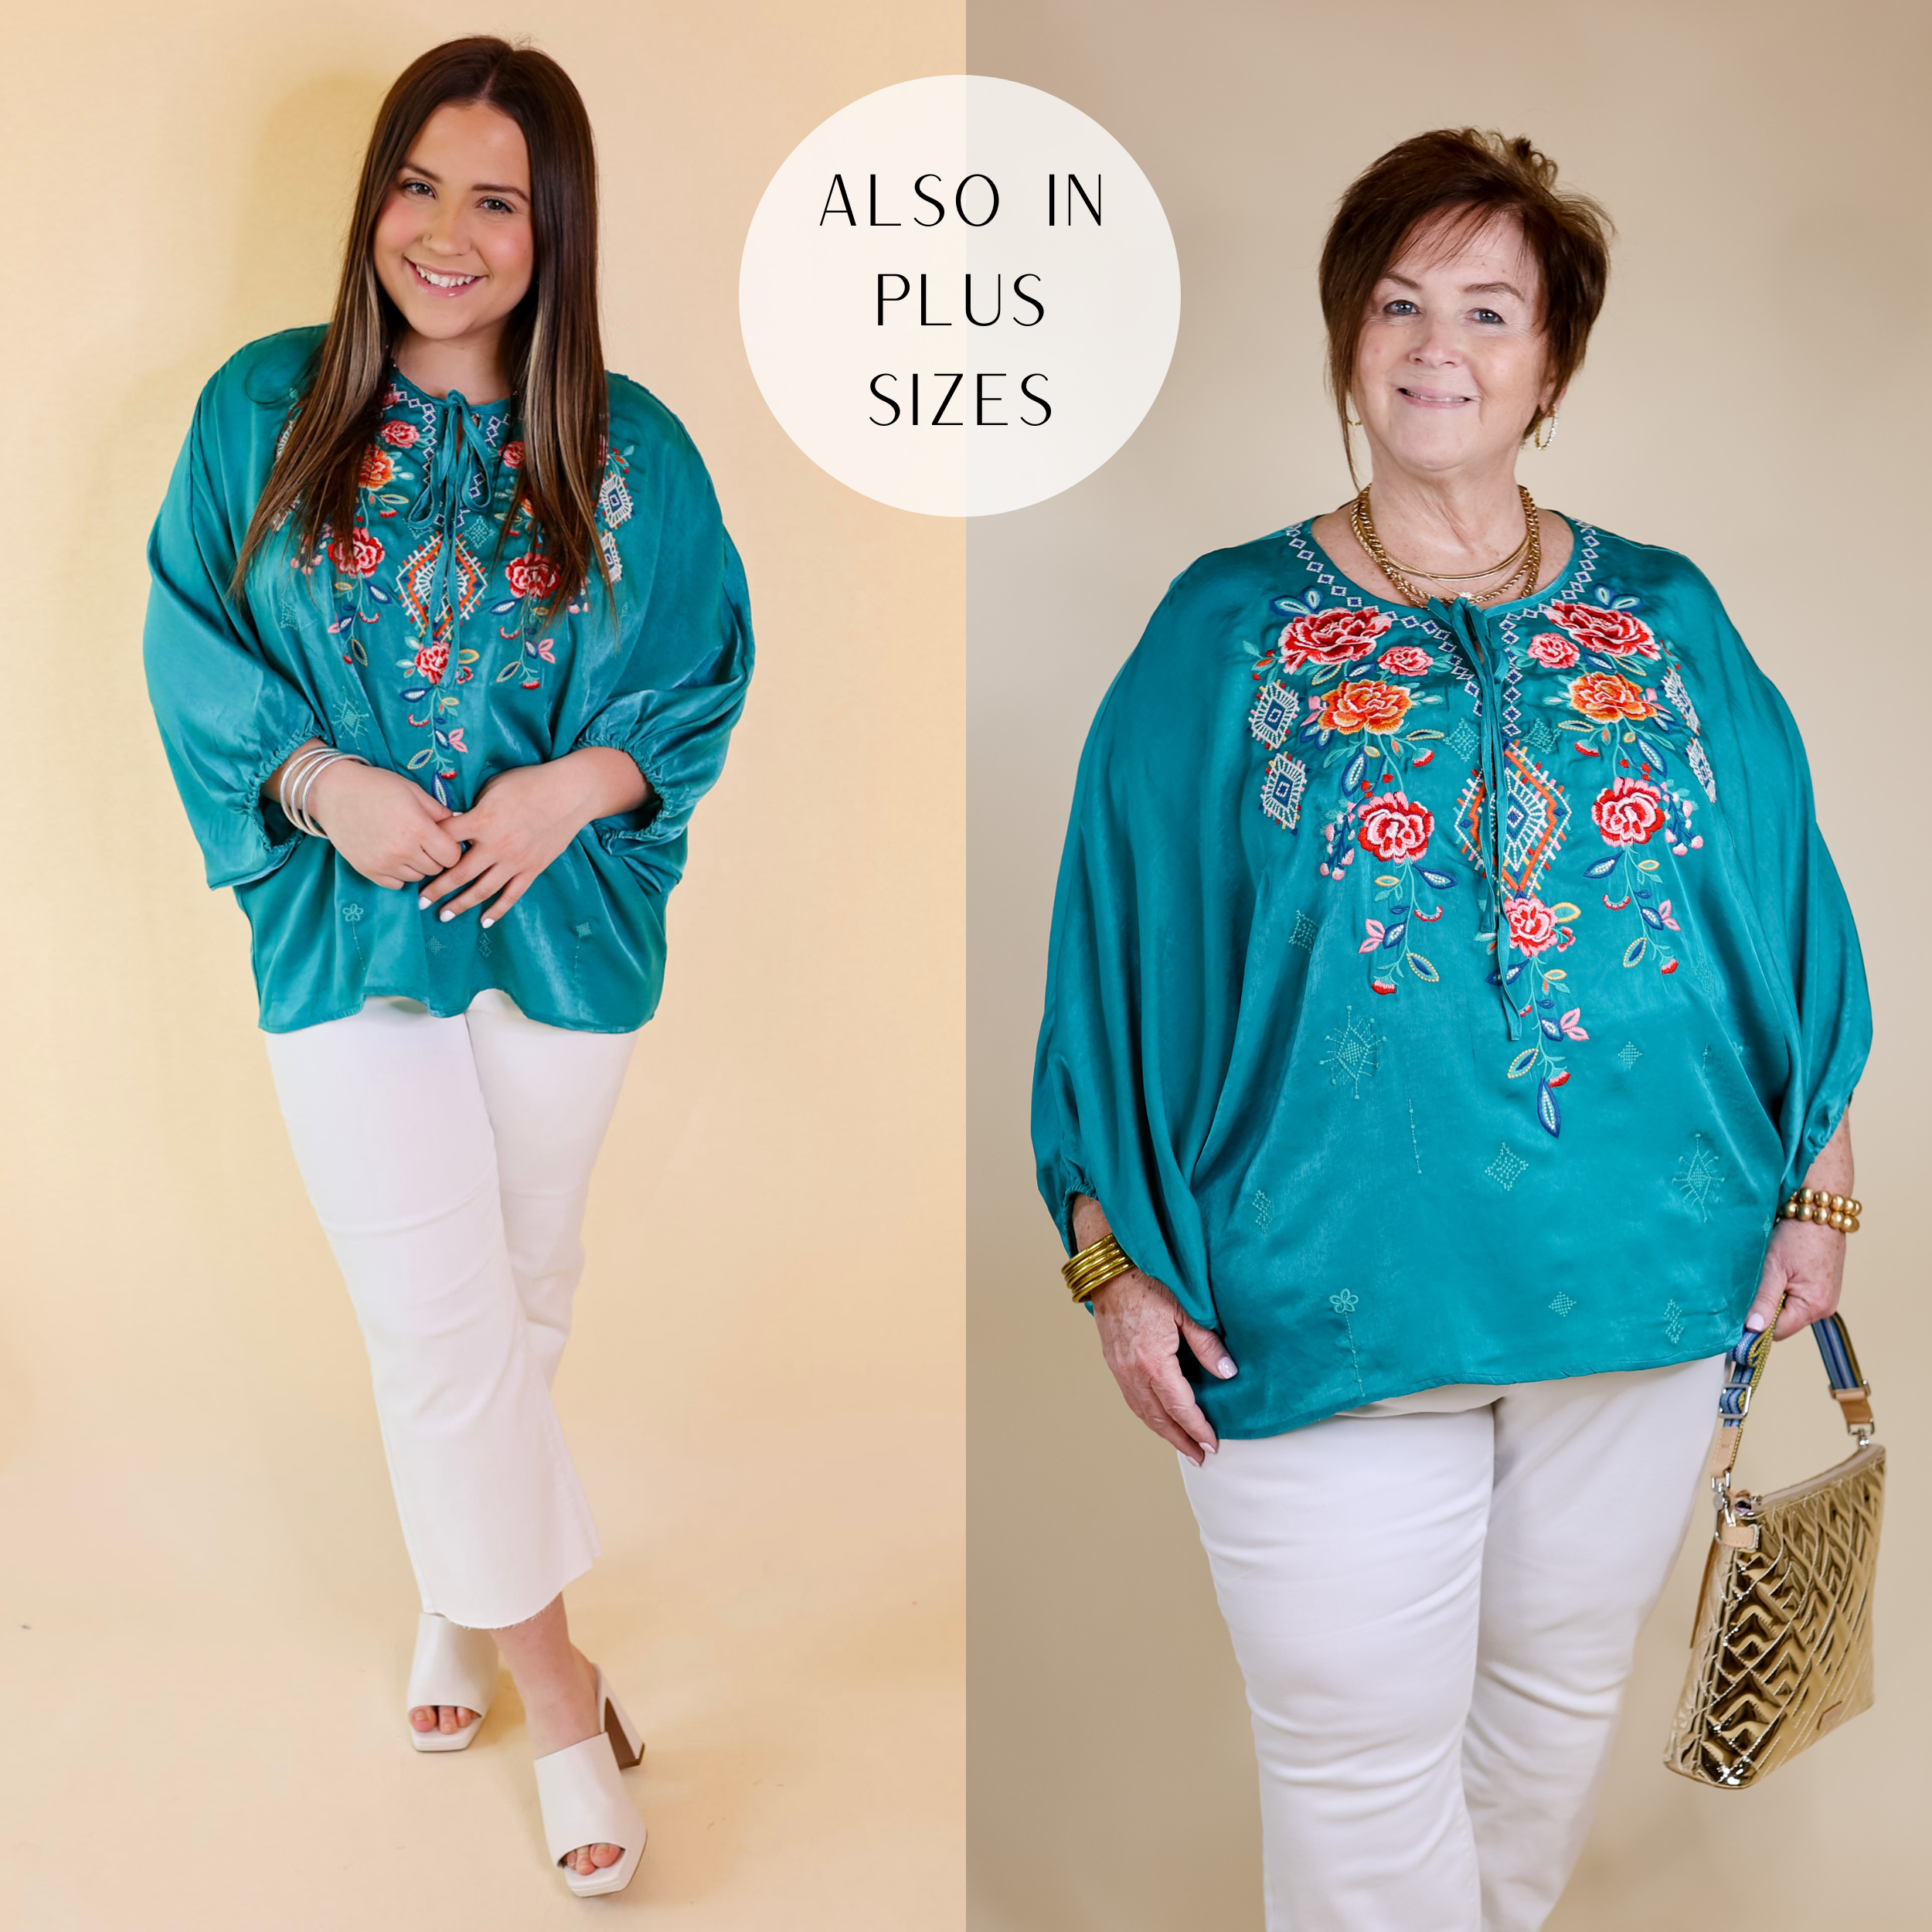 Model is wearing a teal poncho top with colorful floral embroidery, a front keyhole, and a poncho style body. Model has this top paired with white jeans, white heels, and silver jewelry.